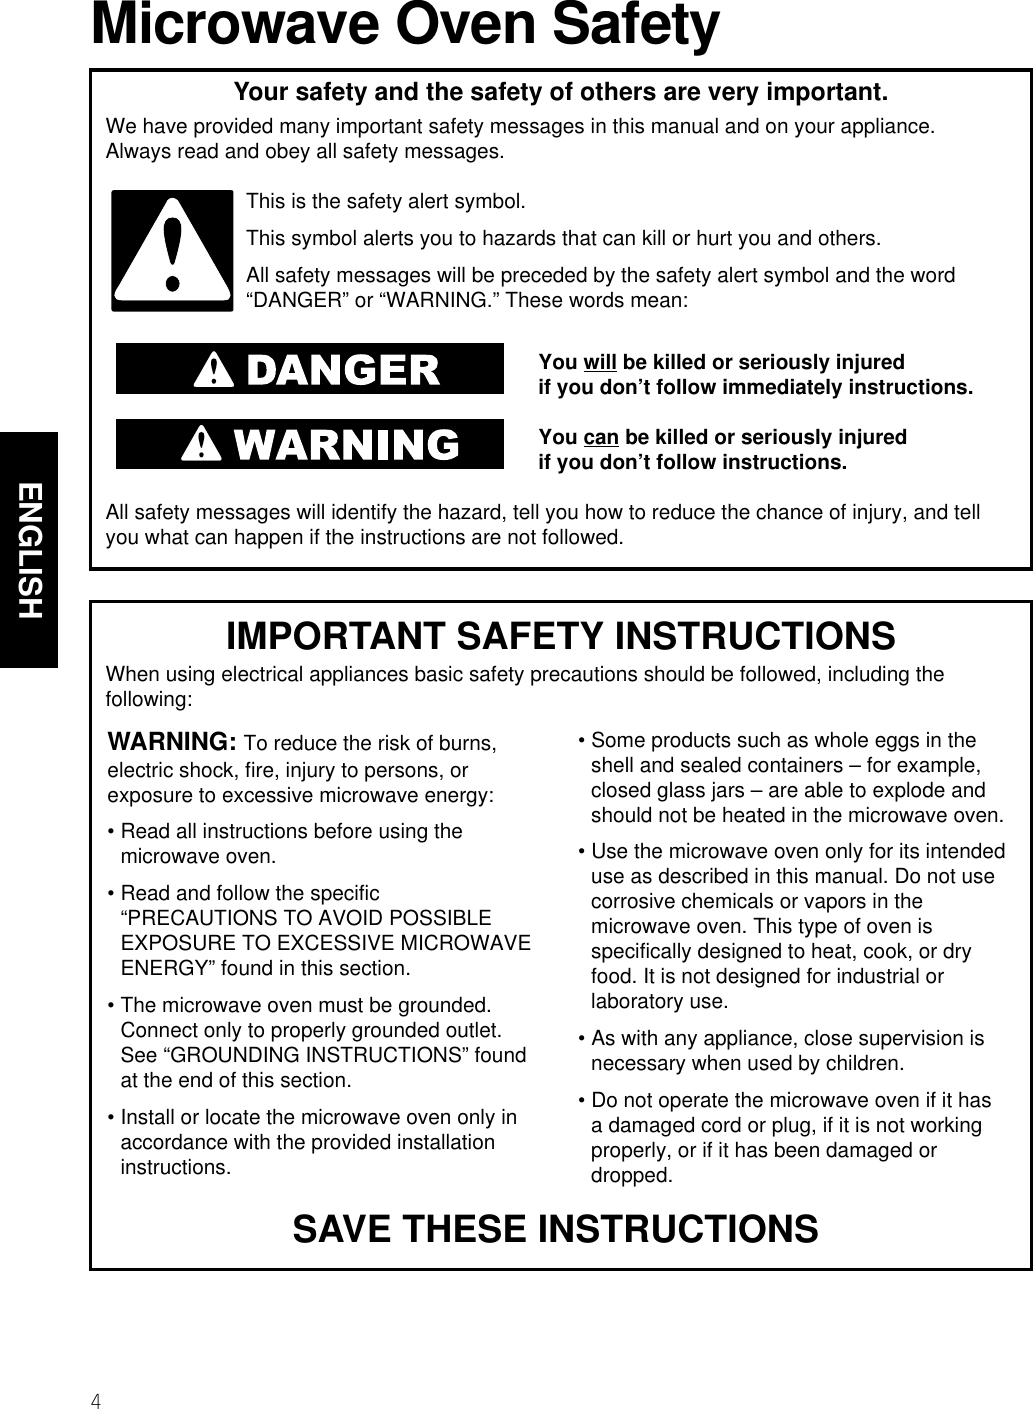 4ENGLISHMicrowave Oven SafetyYour safety and the safety of others are very important.We have provided many important safety messages in this manual and on your appliance. Always read and obey all safety messages.This is the safety alert symbol.This symbol alerts you to hazards that can kill or hurt you and others.All safety messages will be preceded by the safety alert symbol and the word“DANGER” or “WARNING.” These words mean:You will be killed or seriously injuredif you don’t follow immediately instructions.You can be killed or seriously injuredif you don’t follow instructions.All safety messages will identify the hazard, tell you how to reduce the chance of injury, and tellyou what can happen if the instructions are not followed.IMPORTANT SAFETY INSTRUCTIONSWhen using electrical appliances basic safety precautions should be followed, including thefollowing:WARNING: To reduce the risk of burns,electric shock, fire, injury to persons, orexposure to excessive microwave energy:• Read all instructions before using themicrowave oven.• Read and follow the specific“PRECAUTIONS TO AVOID POSSIBLEEXPOSURE TO EXCESSIVE MICROWAVEENERGY” found in this section.• The microwave oven must be grounded.Connect only to properly grounded outlet.See “GROUNDING INSTRUCTIONS” foundat the end of this section.• Install or locate the microwave oven only inaccordance with the provided installationinstructions.• Some products such as whole eggs in theshell and sealed containers – for example,closed glass jars – are able to explode andshould not be heated in the microwave oven.• Use the microwave oven only for its intendeduse as described in this manual. Do not usecorrosive chemicals or vapors in themicrowave oven. This type of oven isspecifically designed to heat, cook, or dryfood. It is not designed for industrial orlaboratory use.• As with any appliance, close supervision isnecessary when used by children.• Do not operate the microwave oven if it hasa damaged cord or plug, if it is not workingproperly, or if it has been damaged ordropped.SAVE THESE INSTRUCTIONS